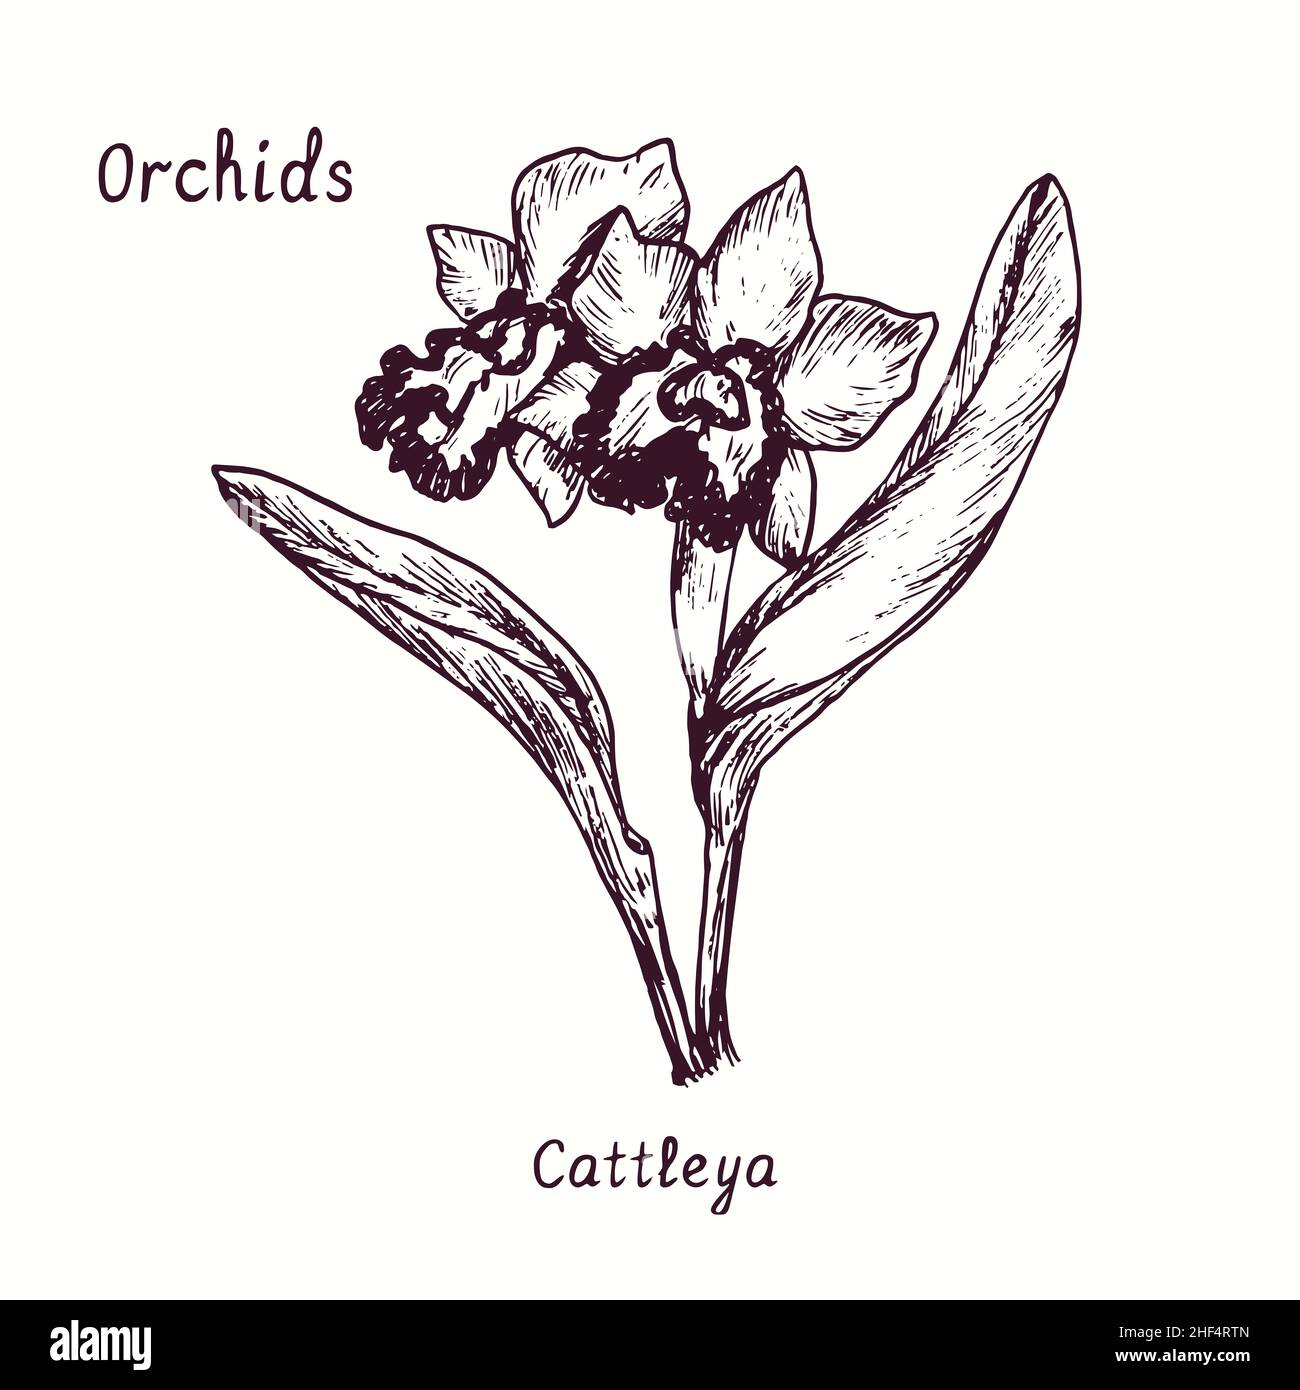 Cattleya orchids flower collection. Ink black and white doodle drawing in woodcut style with inscription. Stock Photo